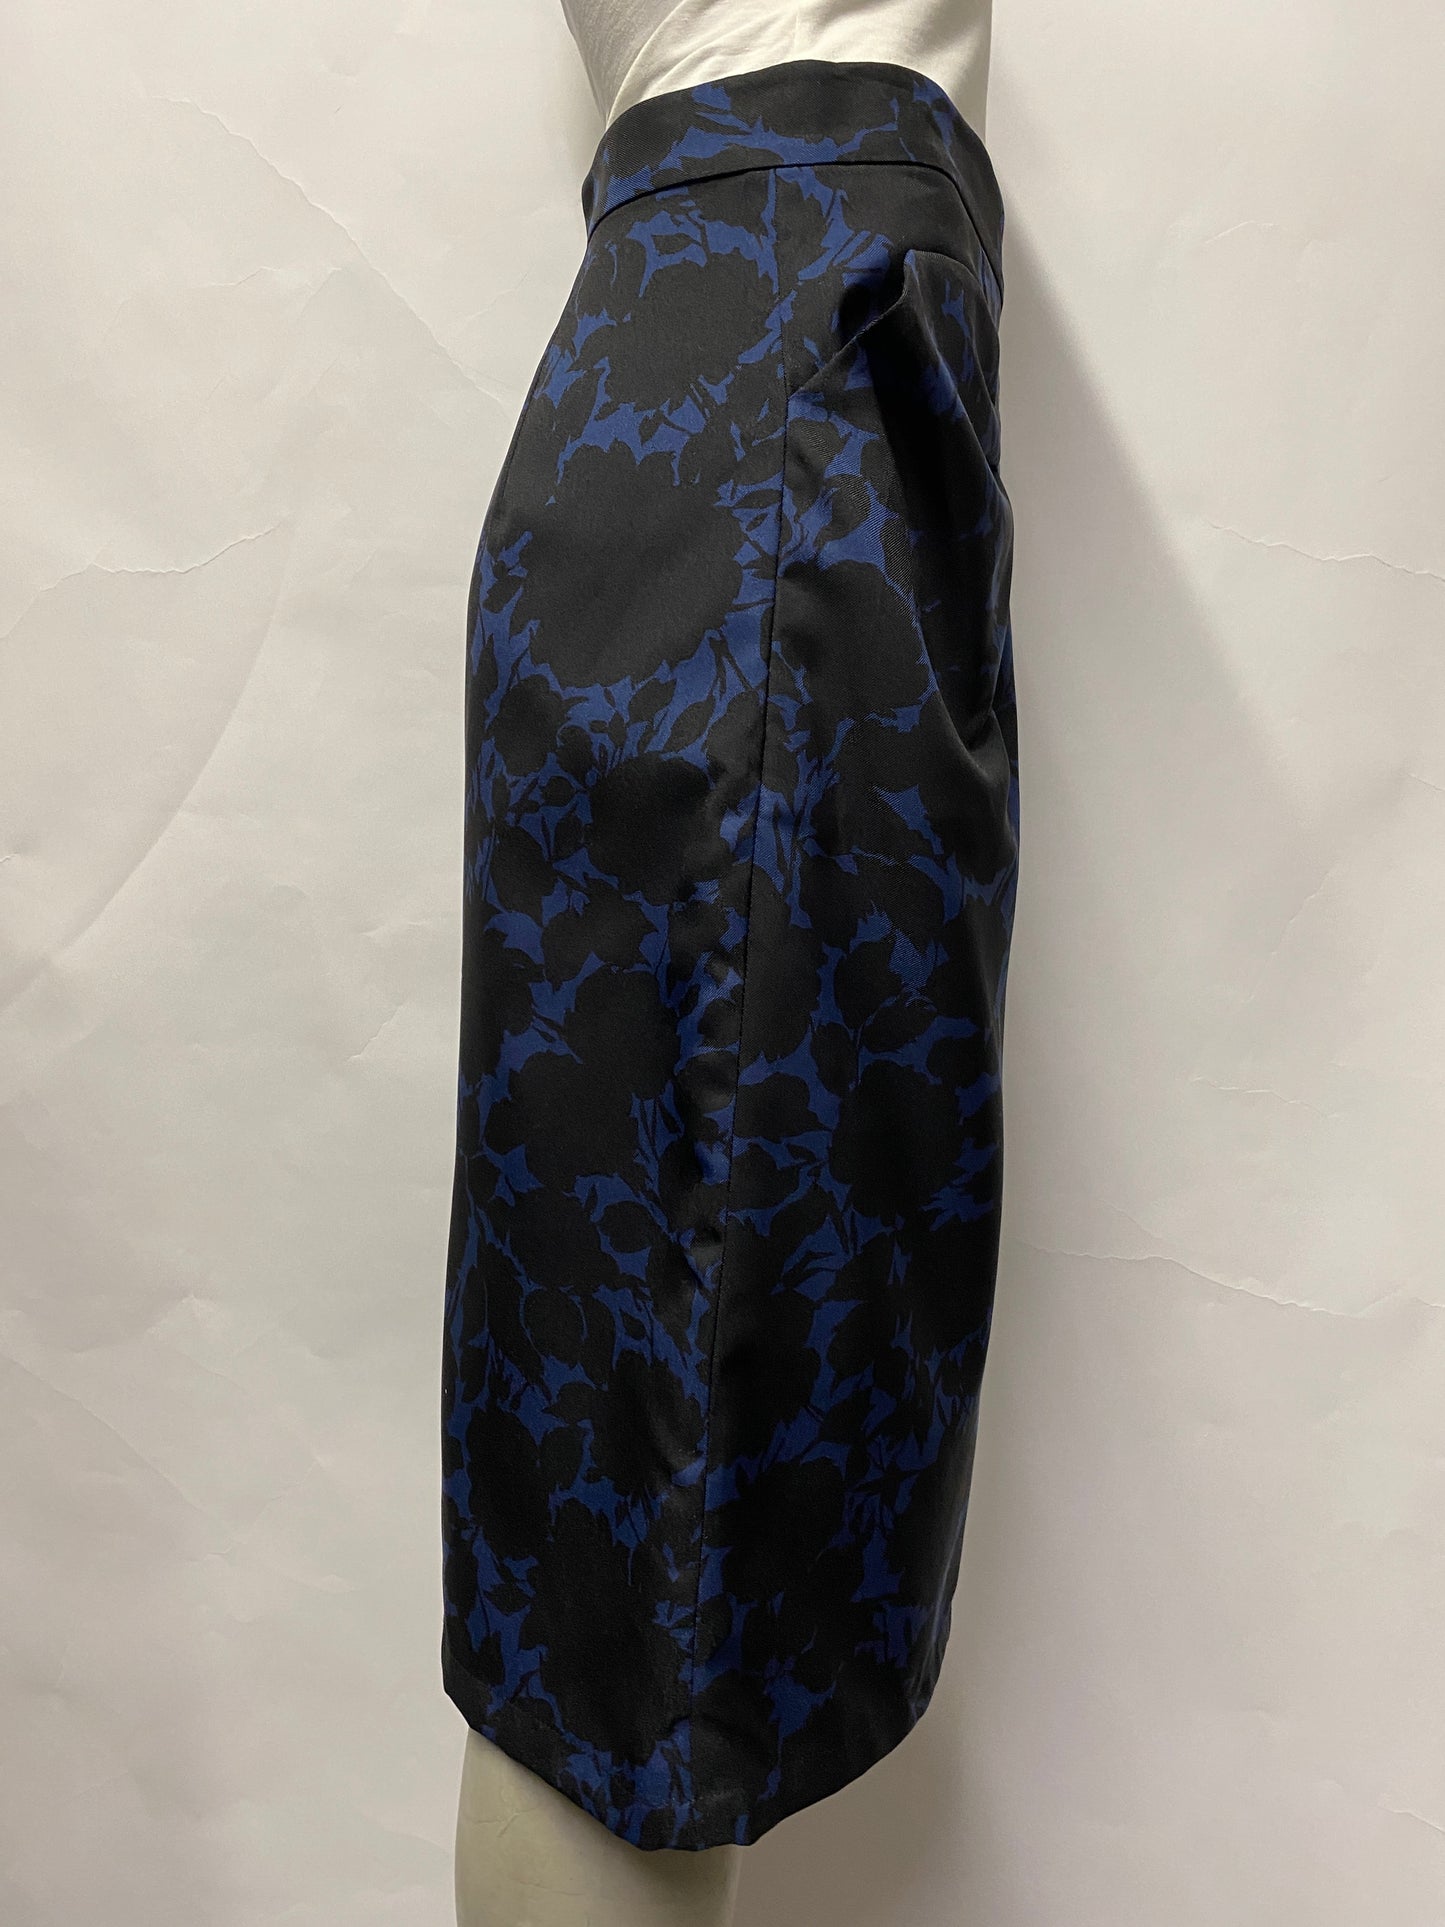 Marc by Marc Jacobs Blue Floral Fitted Pencil Skirt 8